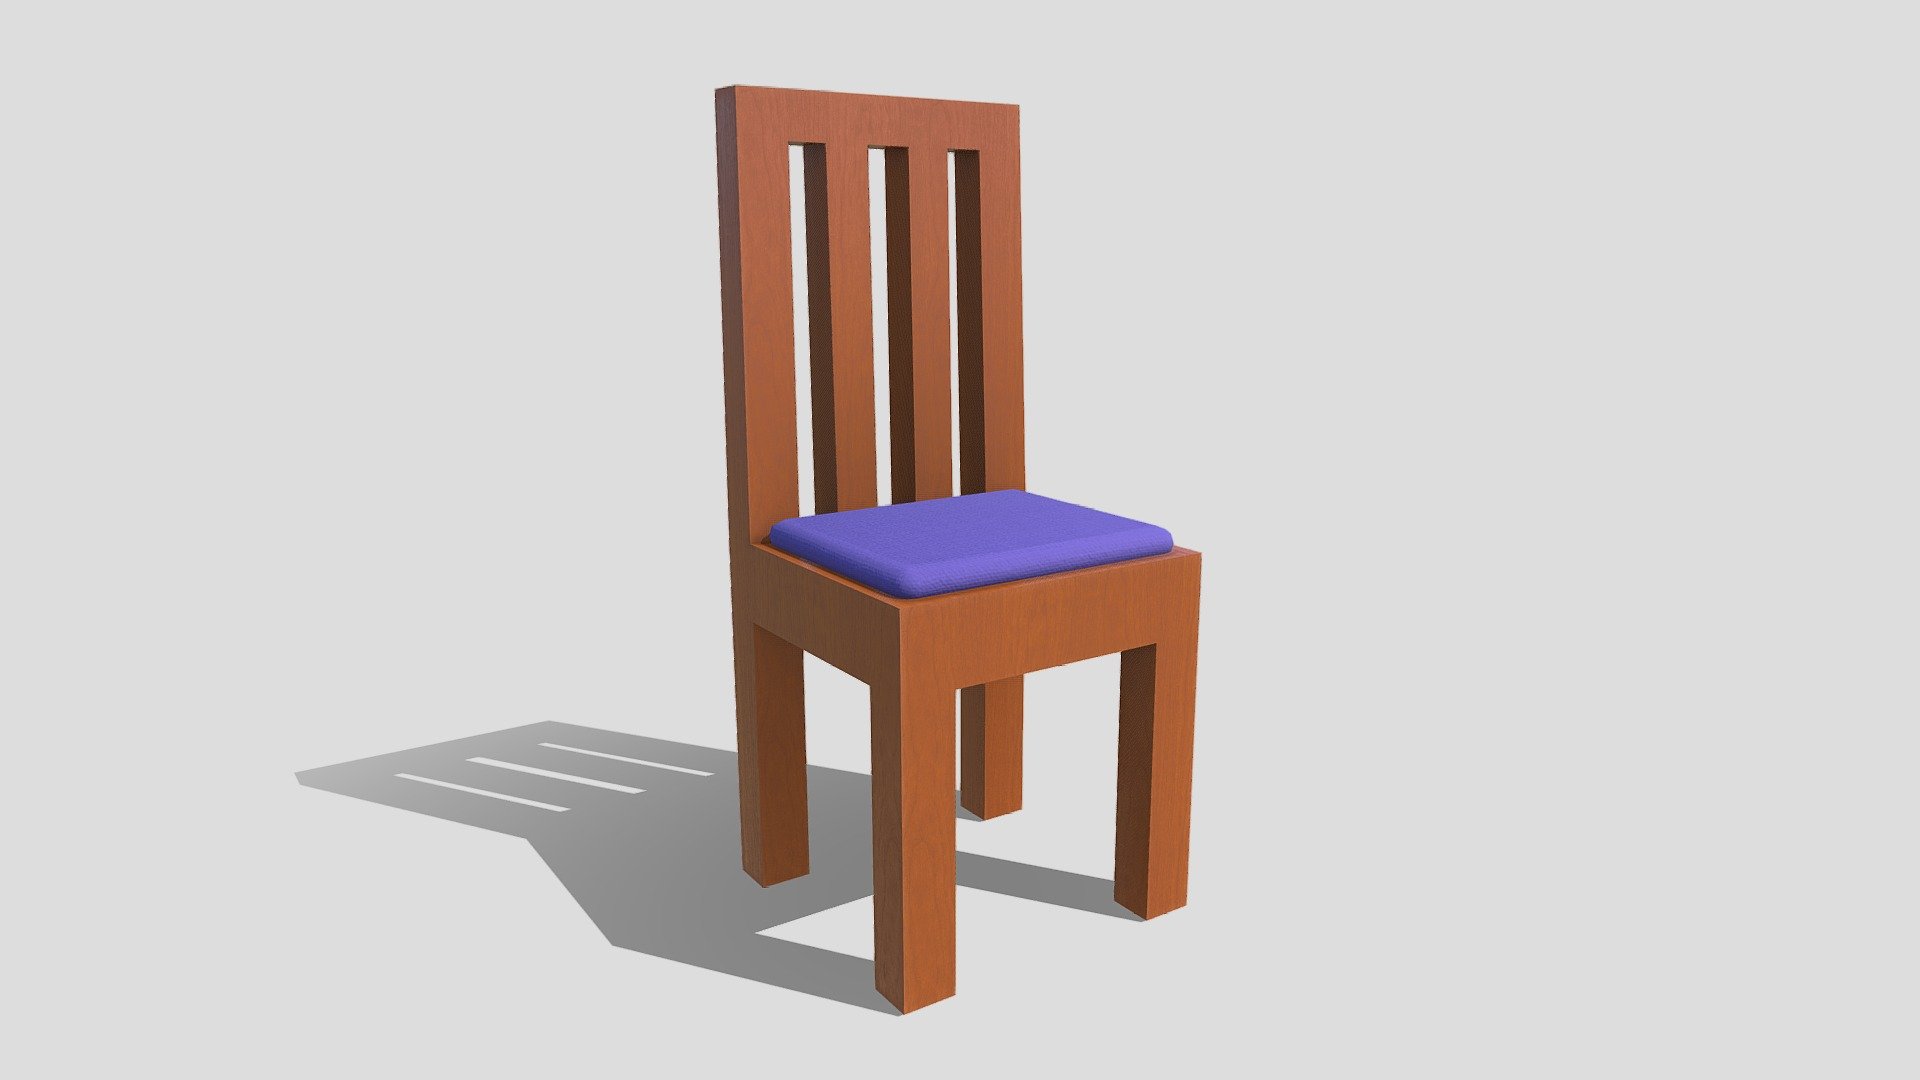 A wooden Toon-style chair for a comic or low-poly setting.

Includes the model and textures 3d model